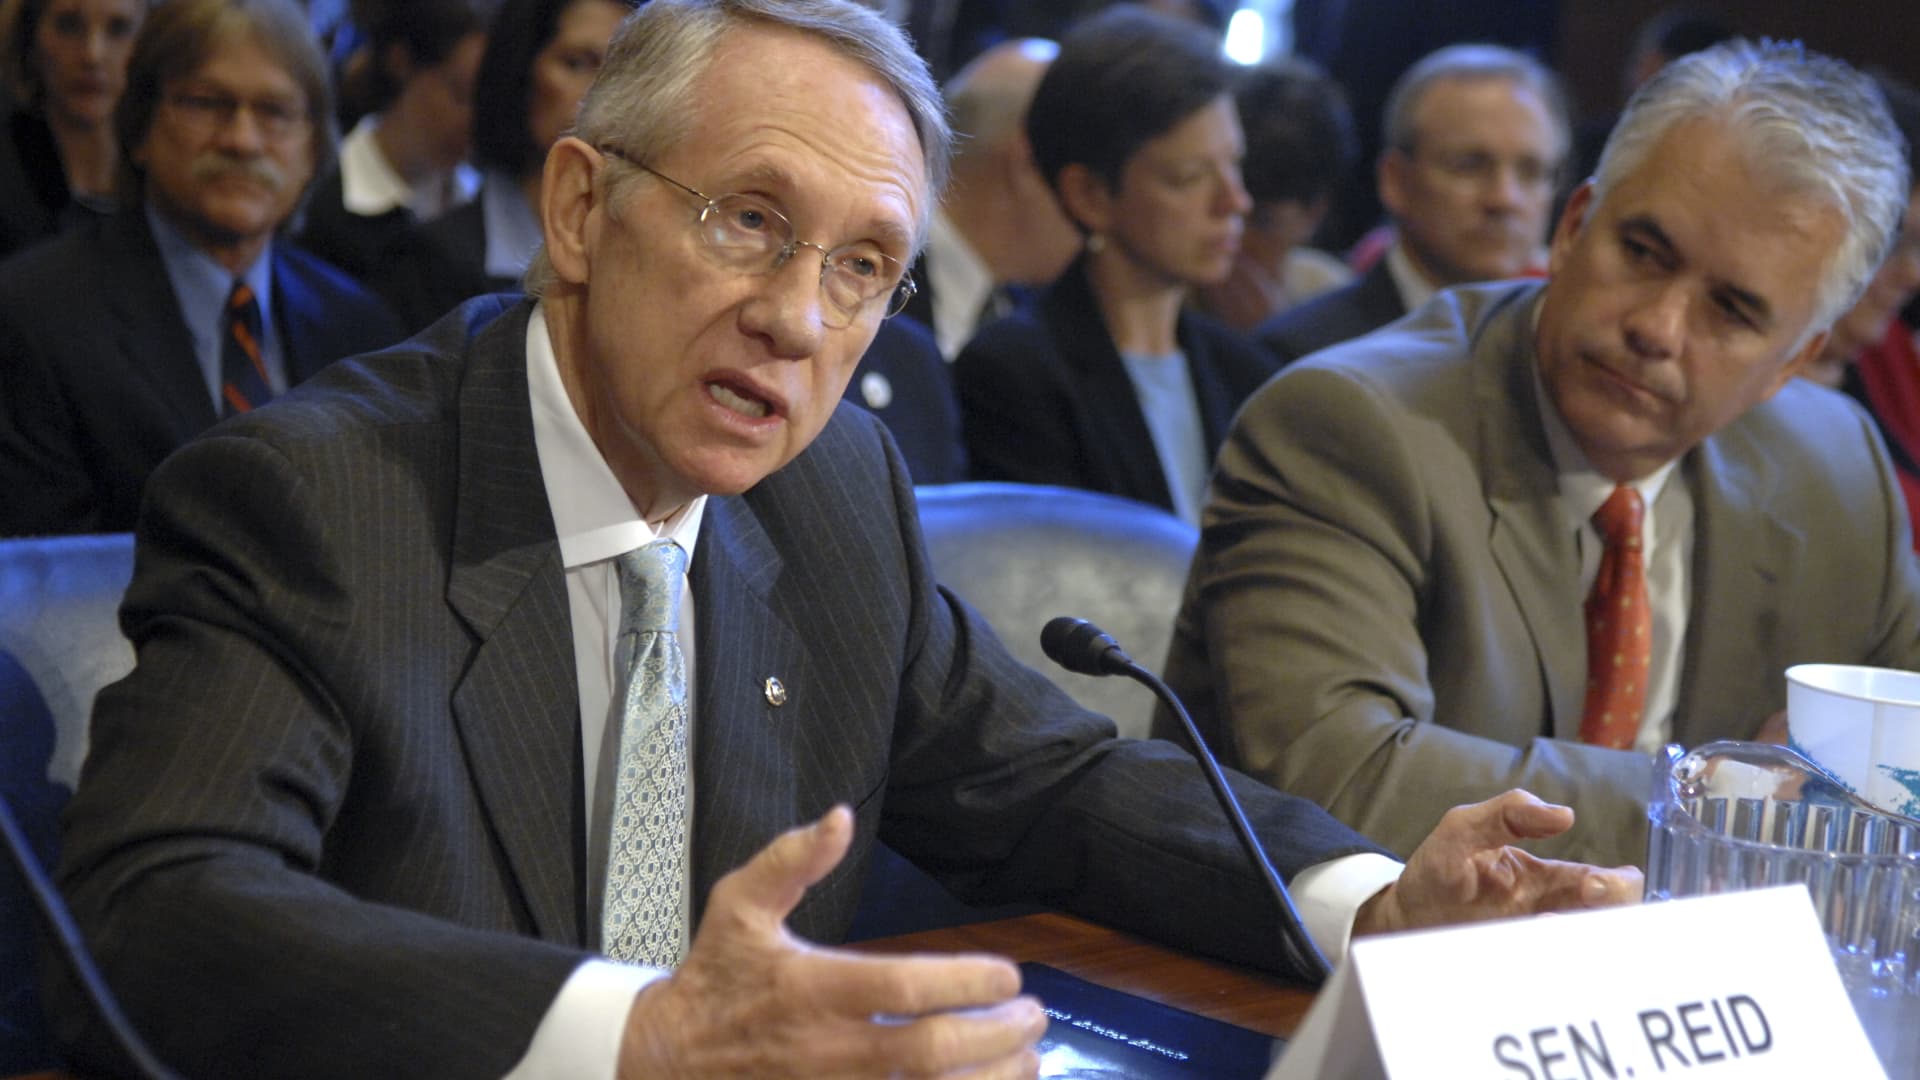 Former Senate Majority Leader Harry Reid, D-Nev., left, and Sen. John Ensign, R-Nev., testified at a hearing on the Yucca Mountain Nuclear Waste Project.